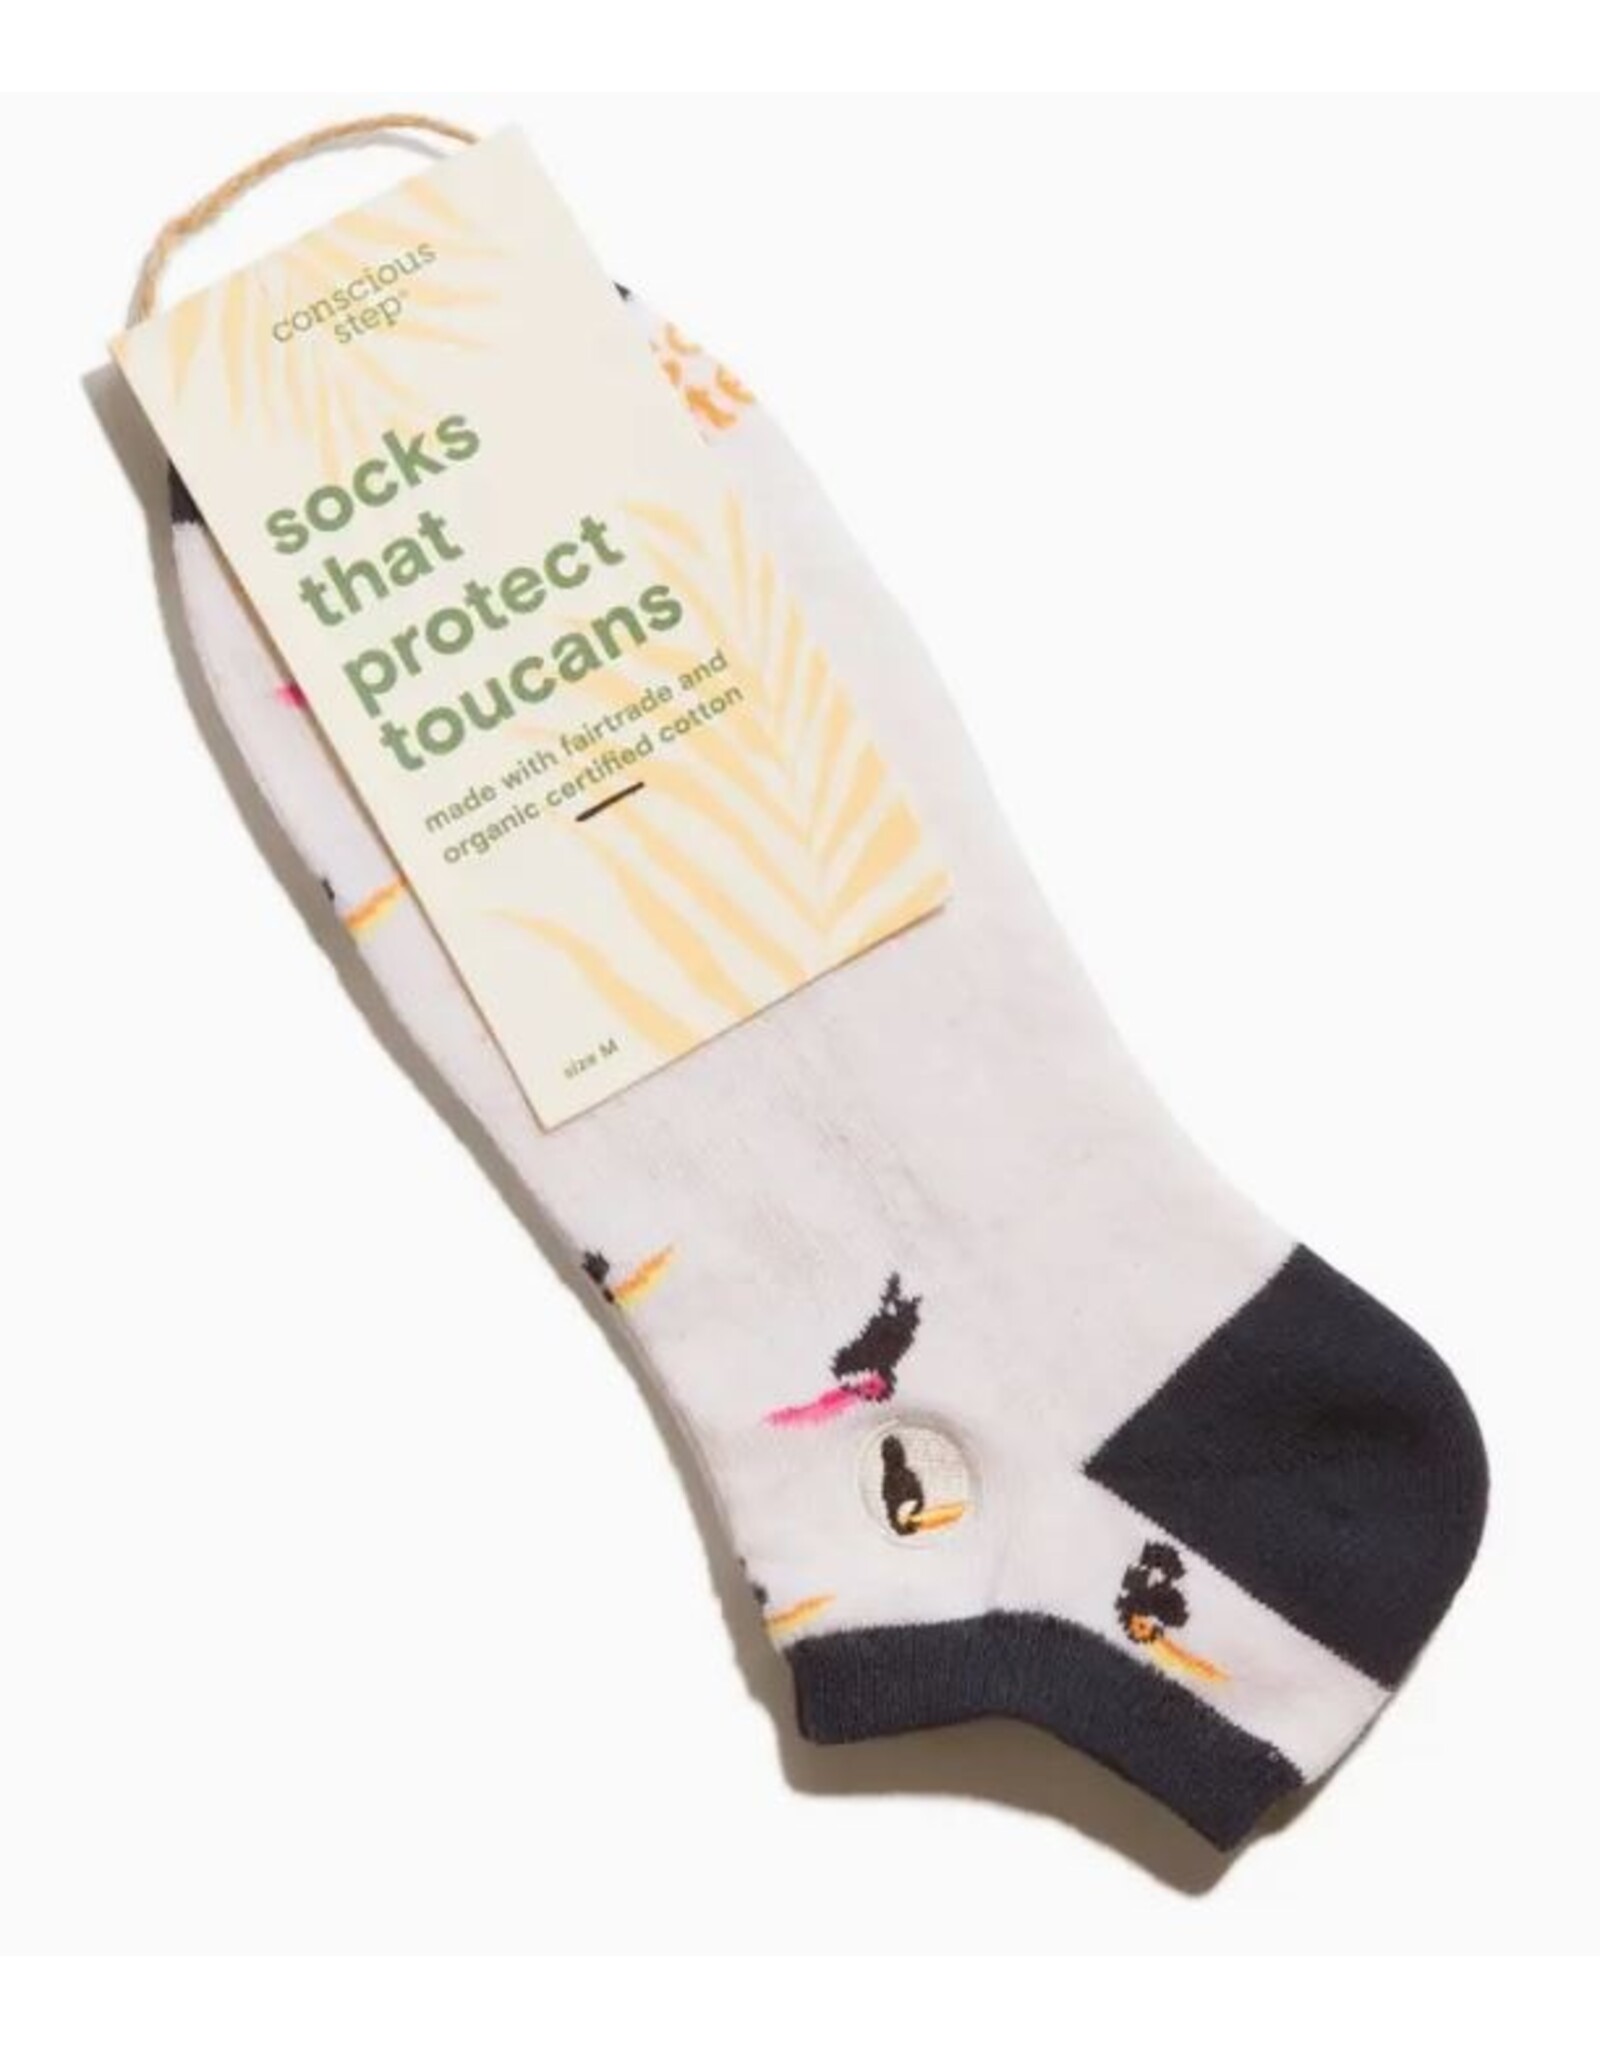 India Ankles Socks That Protect Toucans - Beige